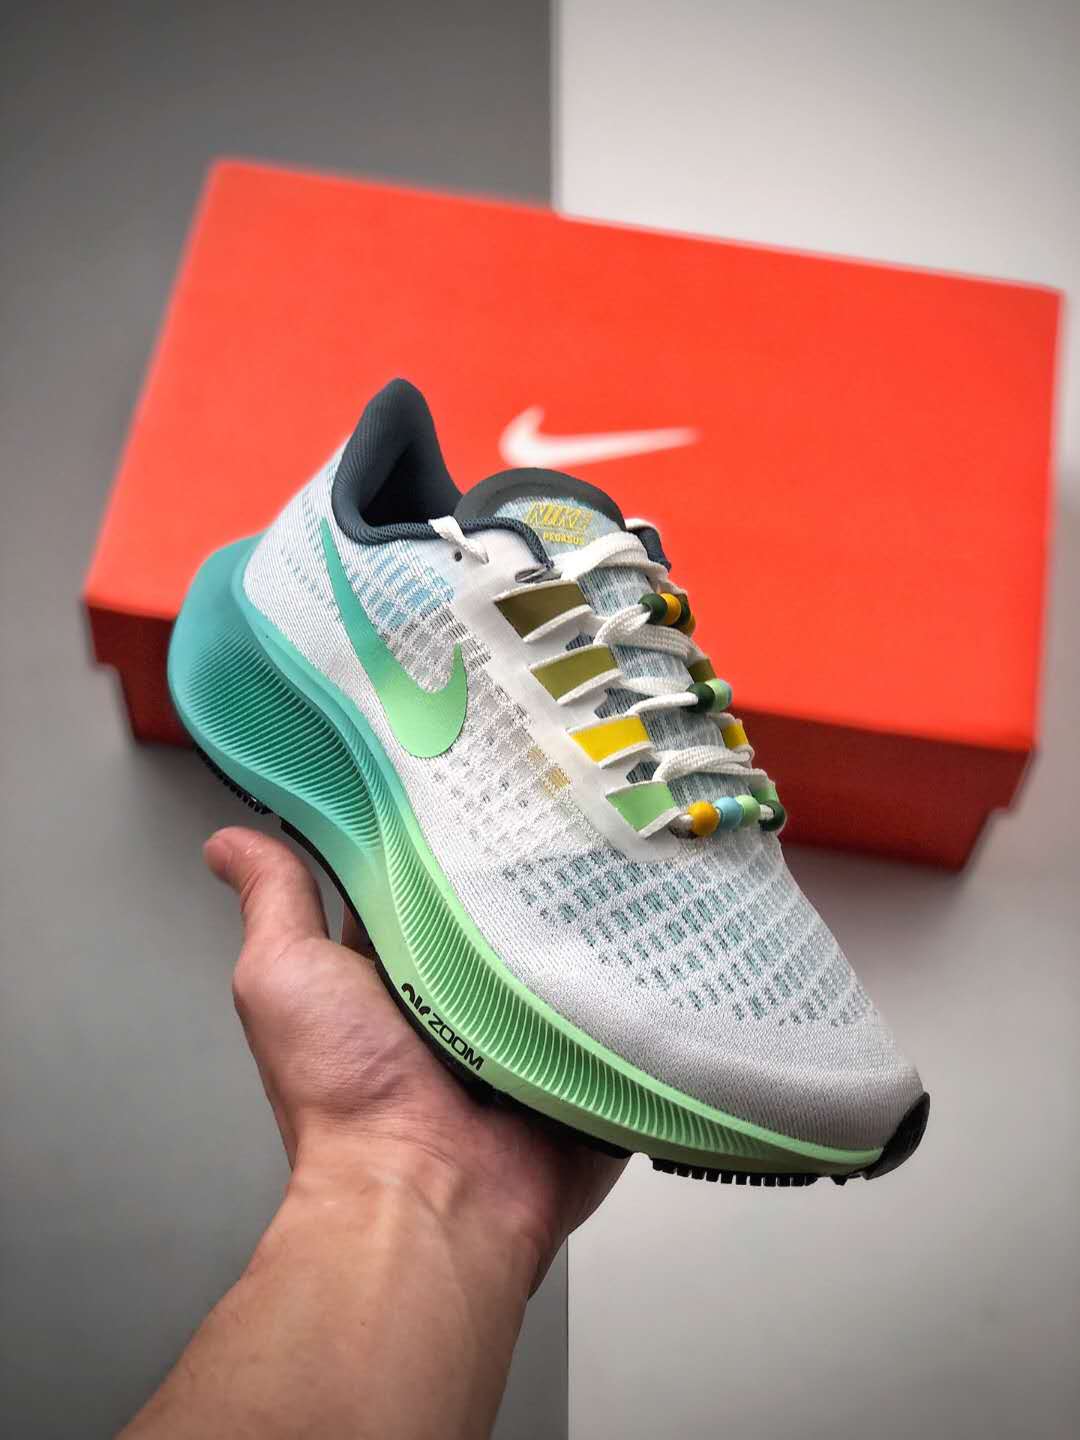 Nike Women's Air Zoom Pegasus 37 Butterfly White Vapor Green CZ8692-134 - Shop Now for the Latest Nike Running Shoes